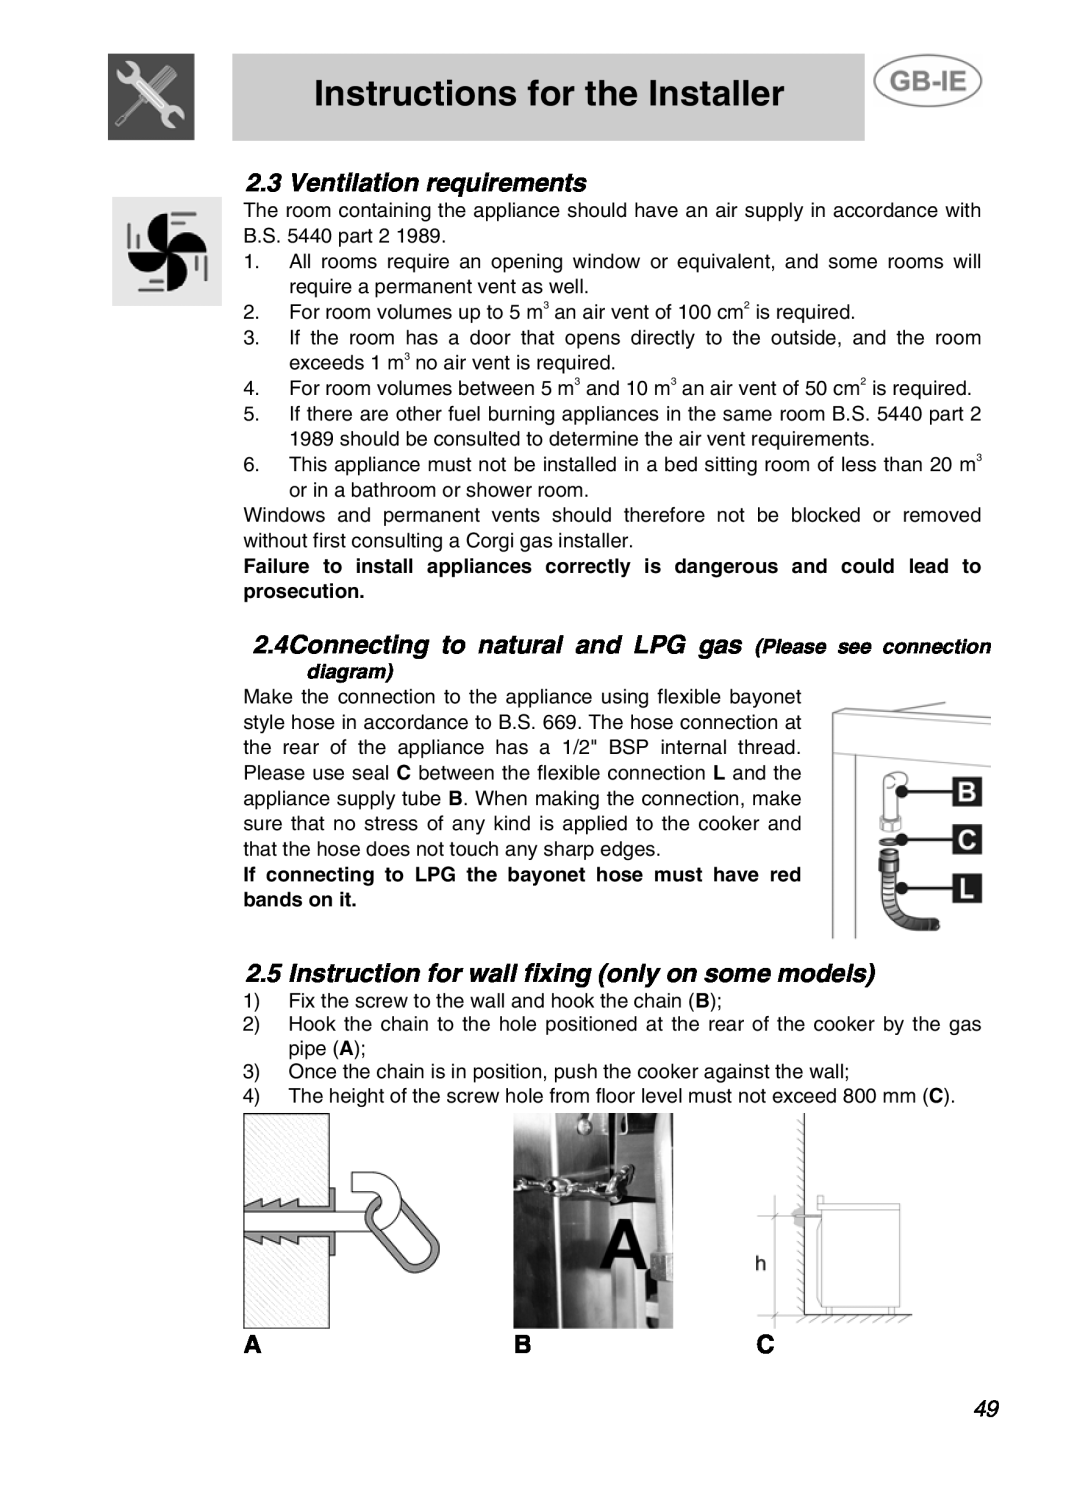 Smeg A4-5 manual Ventilation requirements, Instructions for the Installer, diagram 